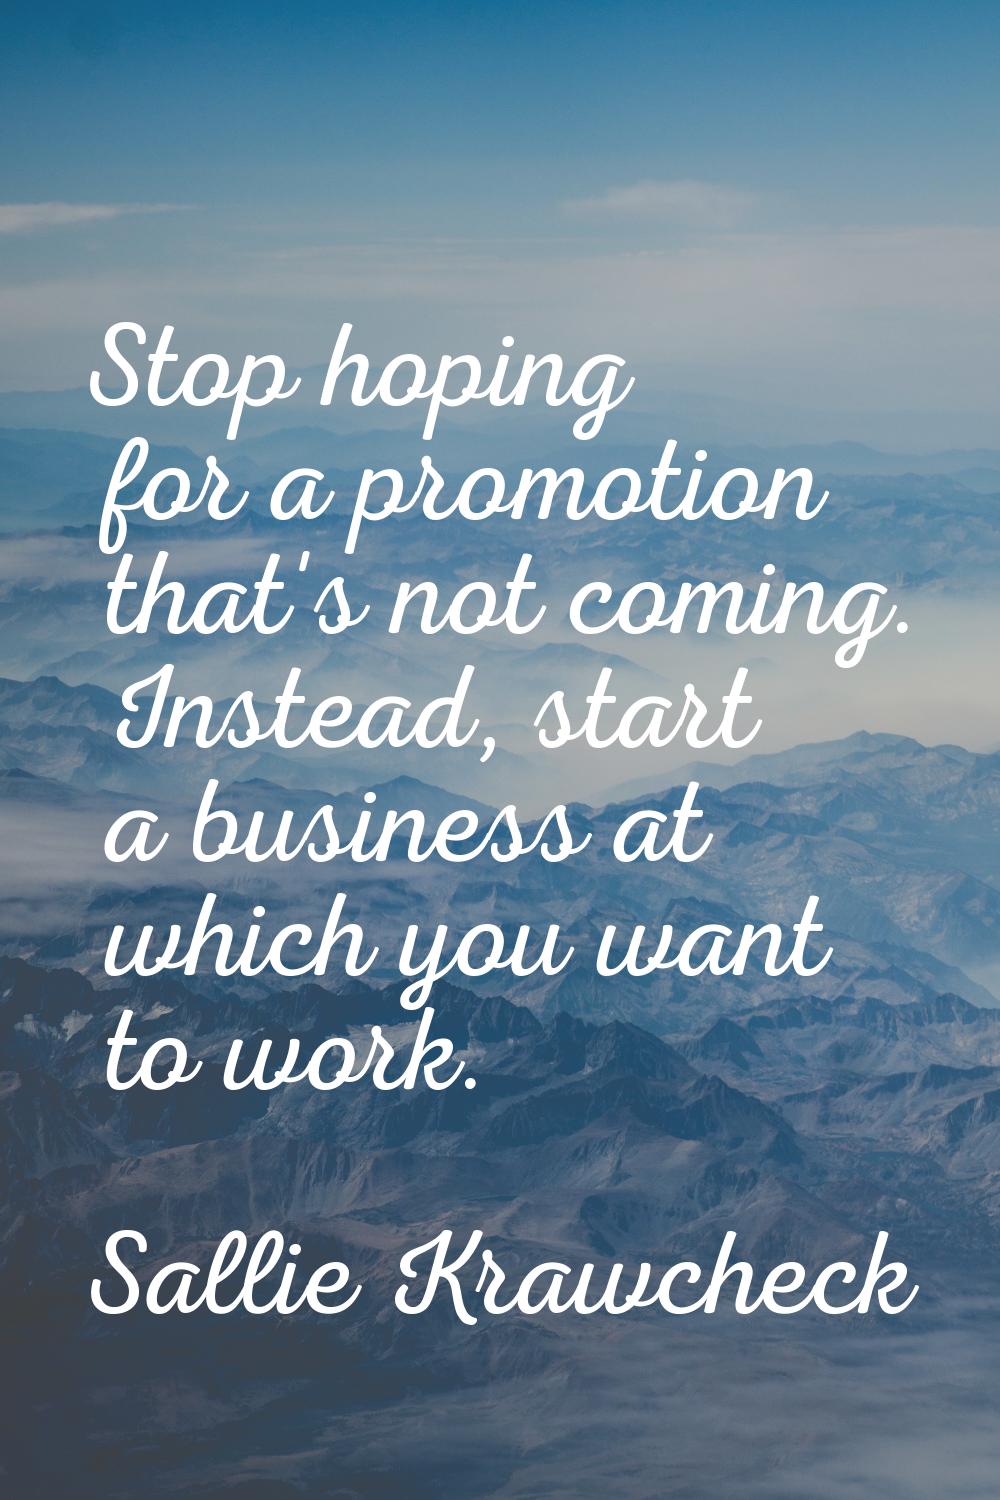 Stop hoping for a promotion that's not coming. Instead, start a business at which you want to work.